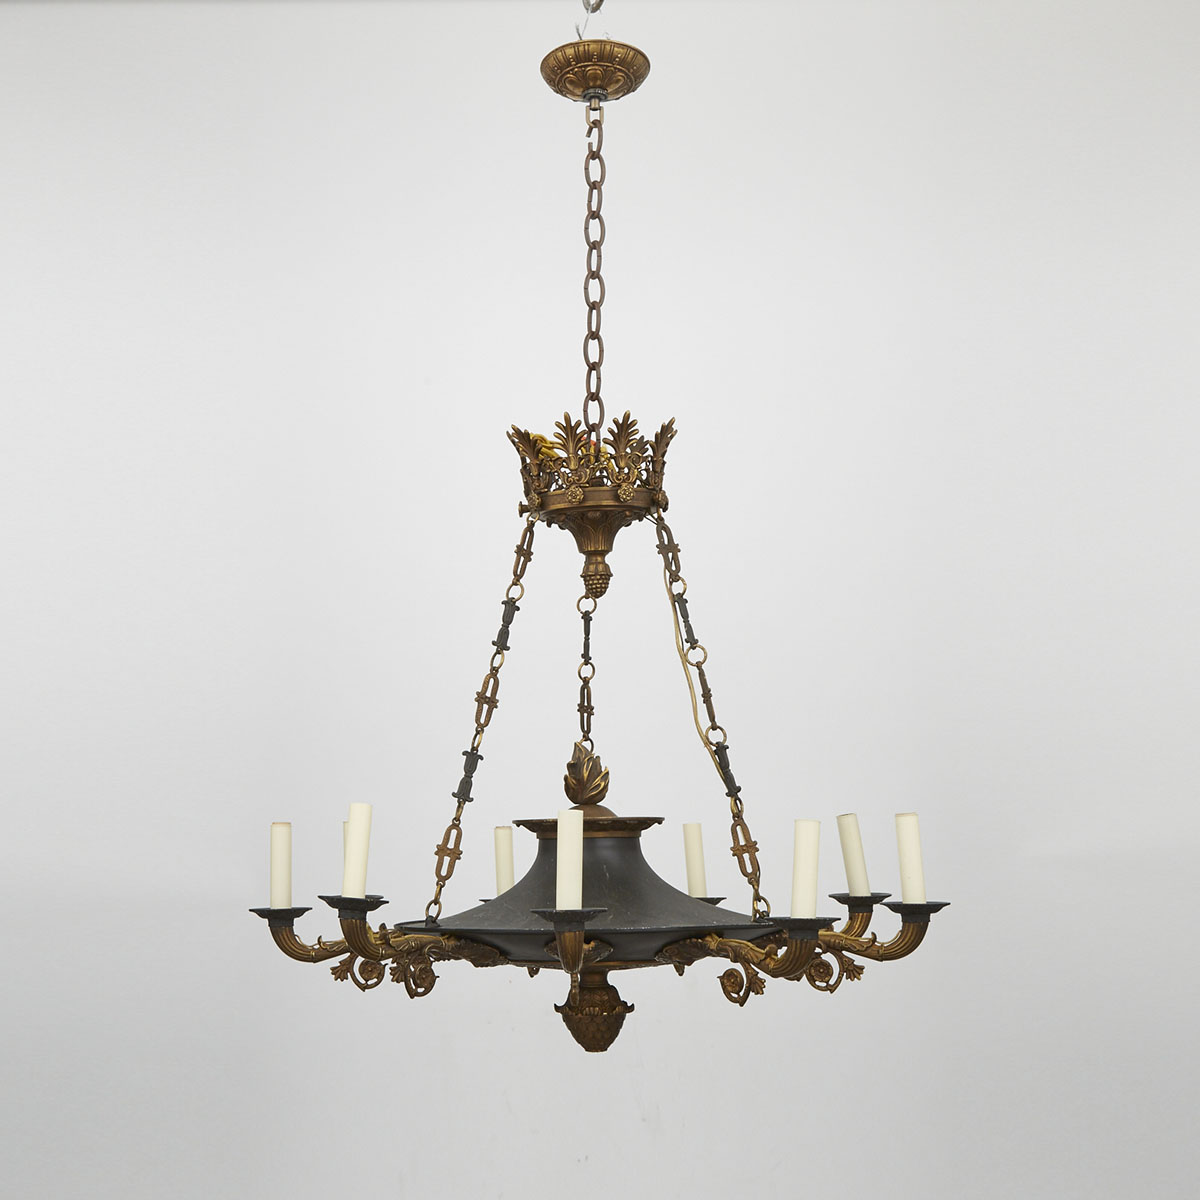 French Empire Style Gilt and Patinated Bronze Nine Light Chandelier,early 20th century